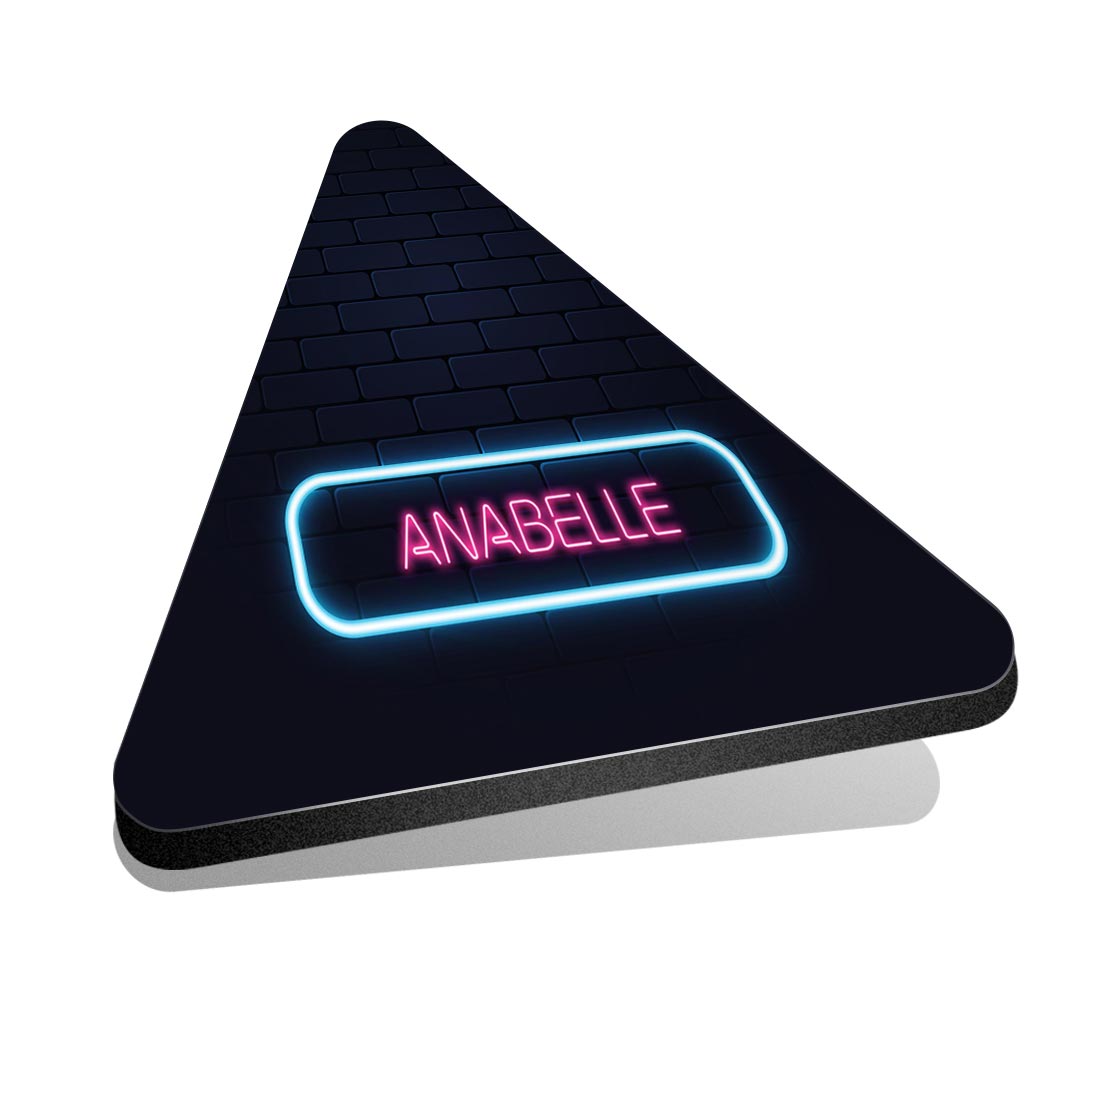 1x Triangle Fridge MDF Magnet Neon Sign Design Anabelle Name #352721 - Picture 1 of 1